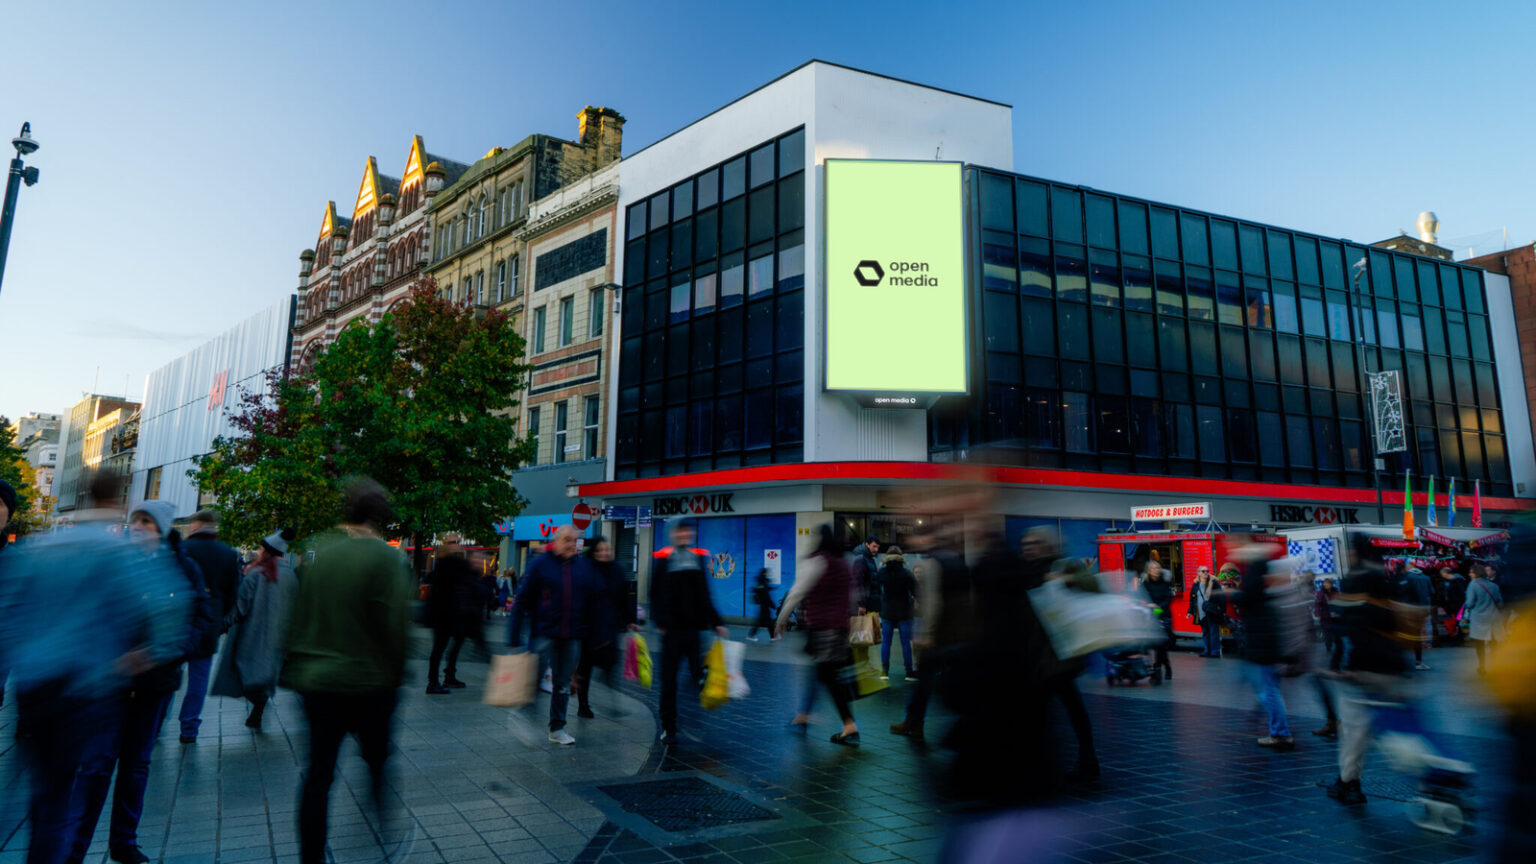 Open Media OOH screen in Liverpool One featuring new branding